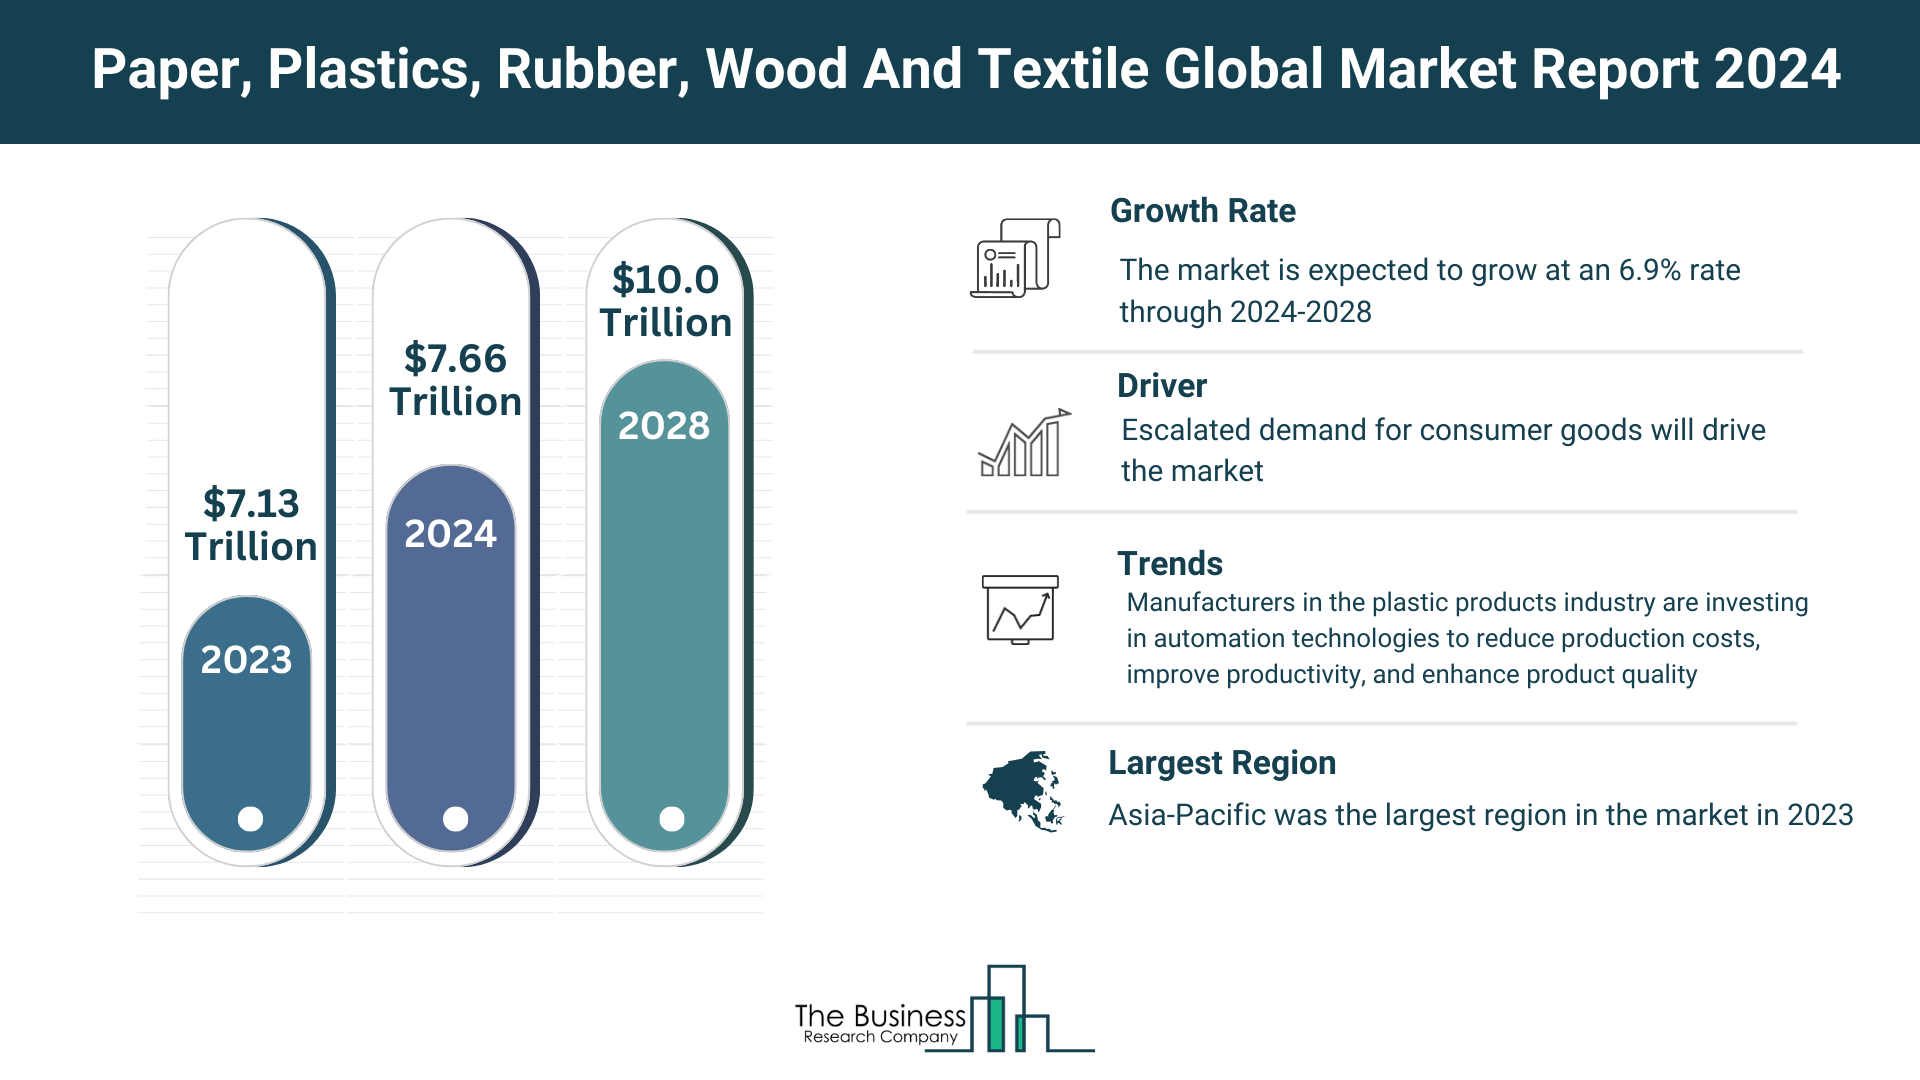 Global Paper, Plastics, Rubber, Wood And Textile Market Analysis: Size, Drivers, Trends, Opportunities And Strategies